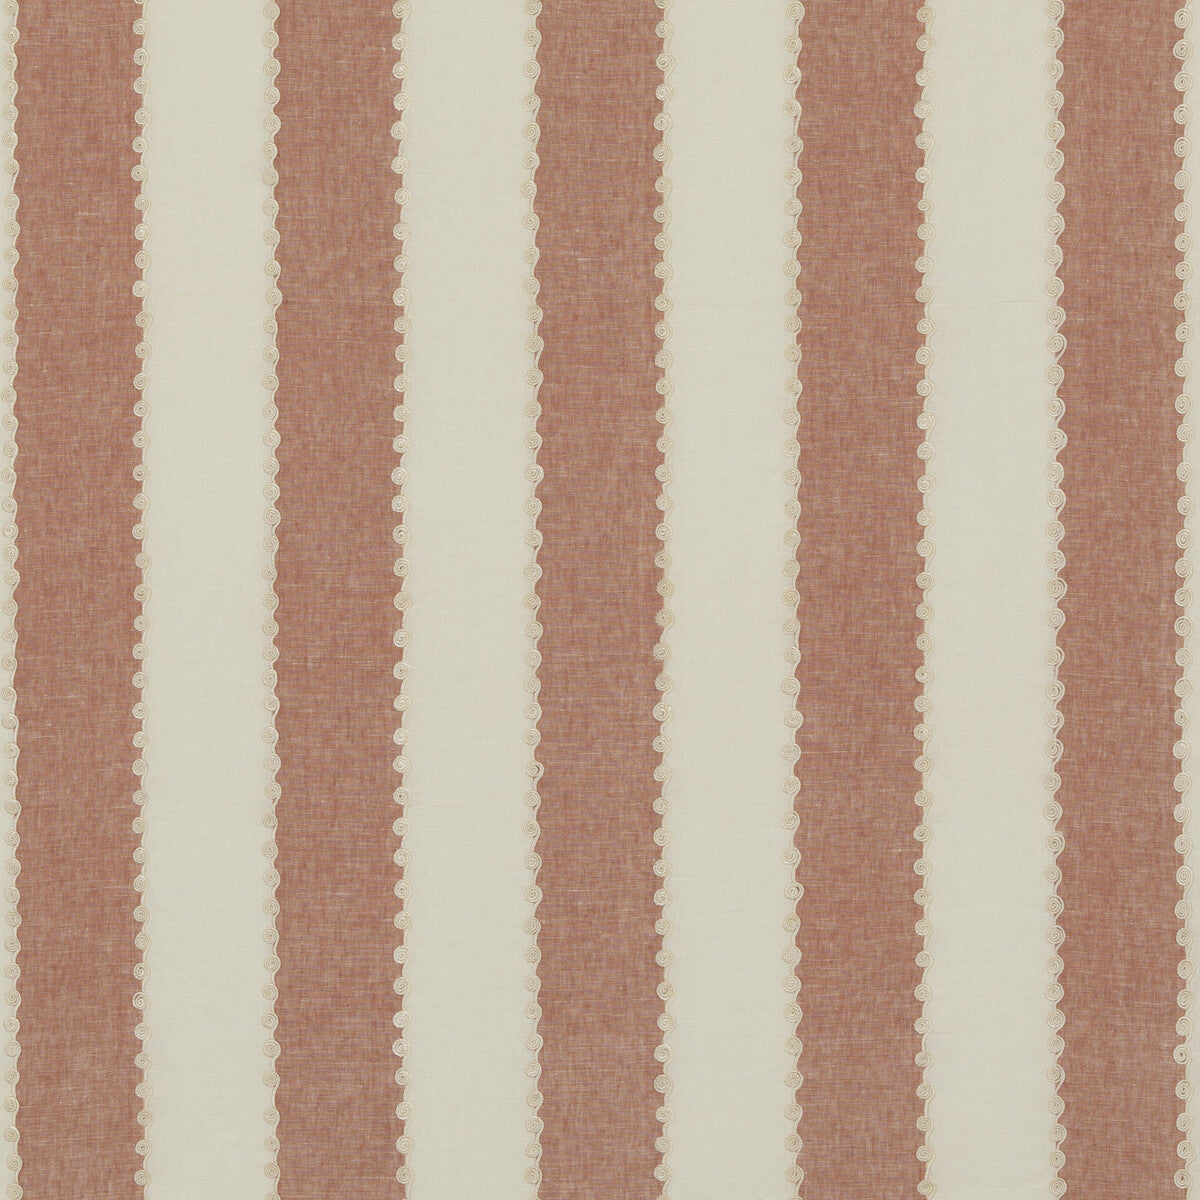 Ashmore Stripe fabric in red color - pattern BF10944.450.0 - by G P &amp; J Baker in the Ashmore collection